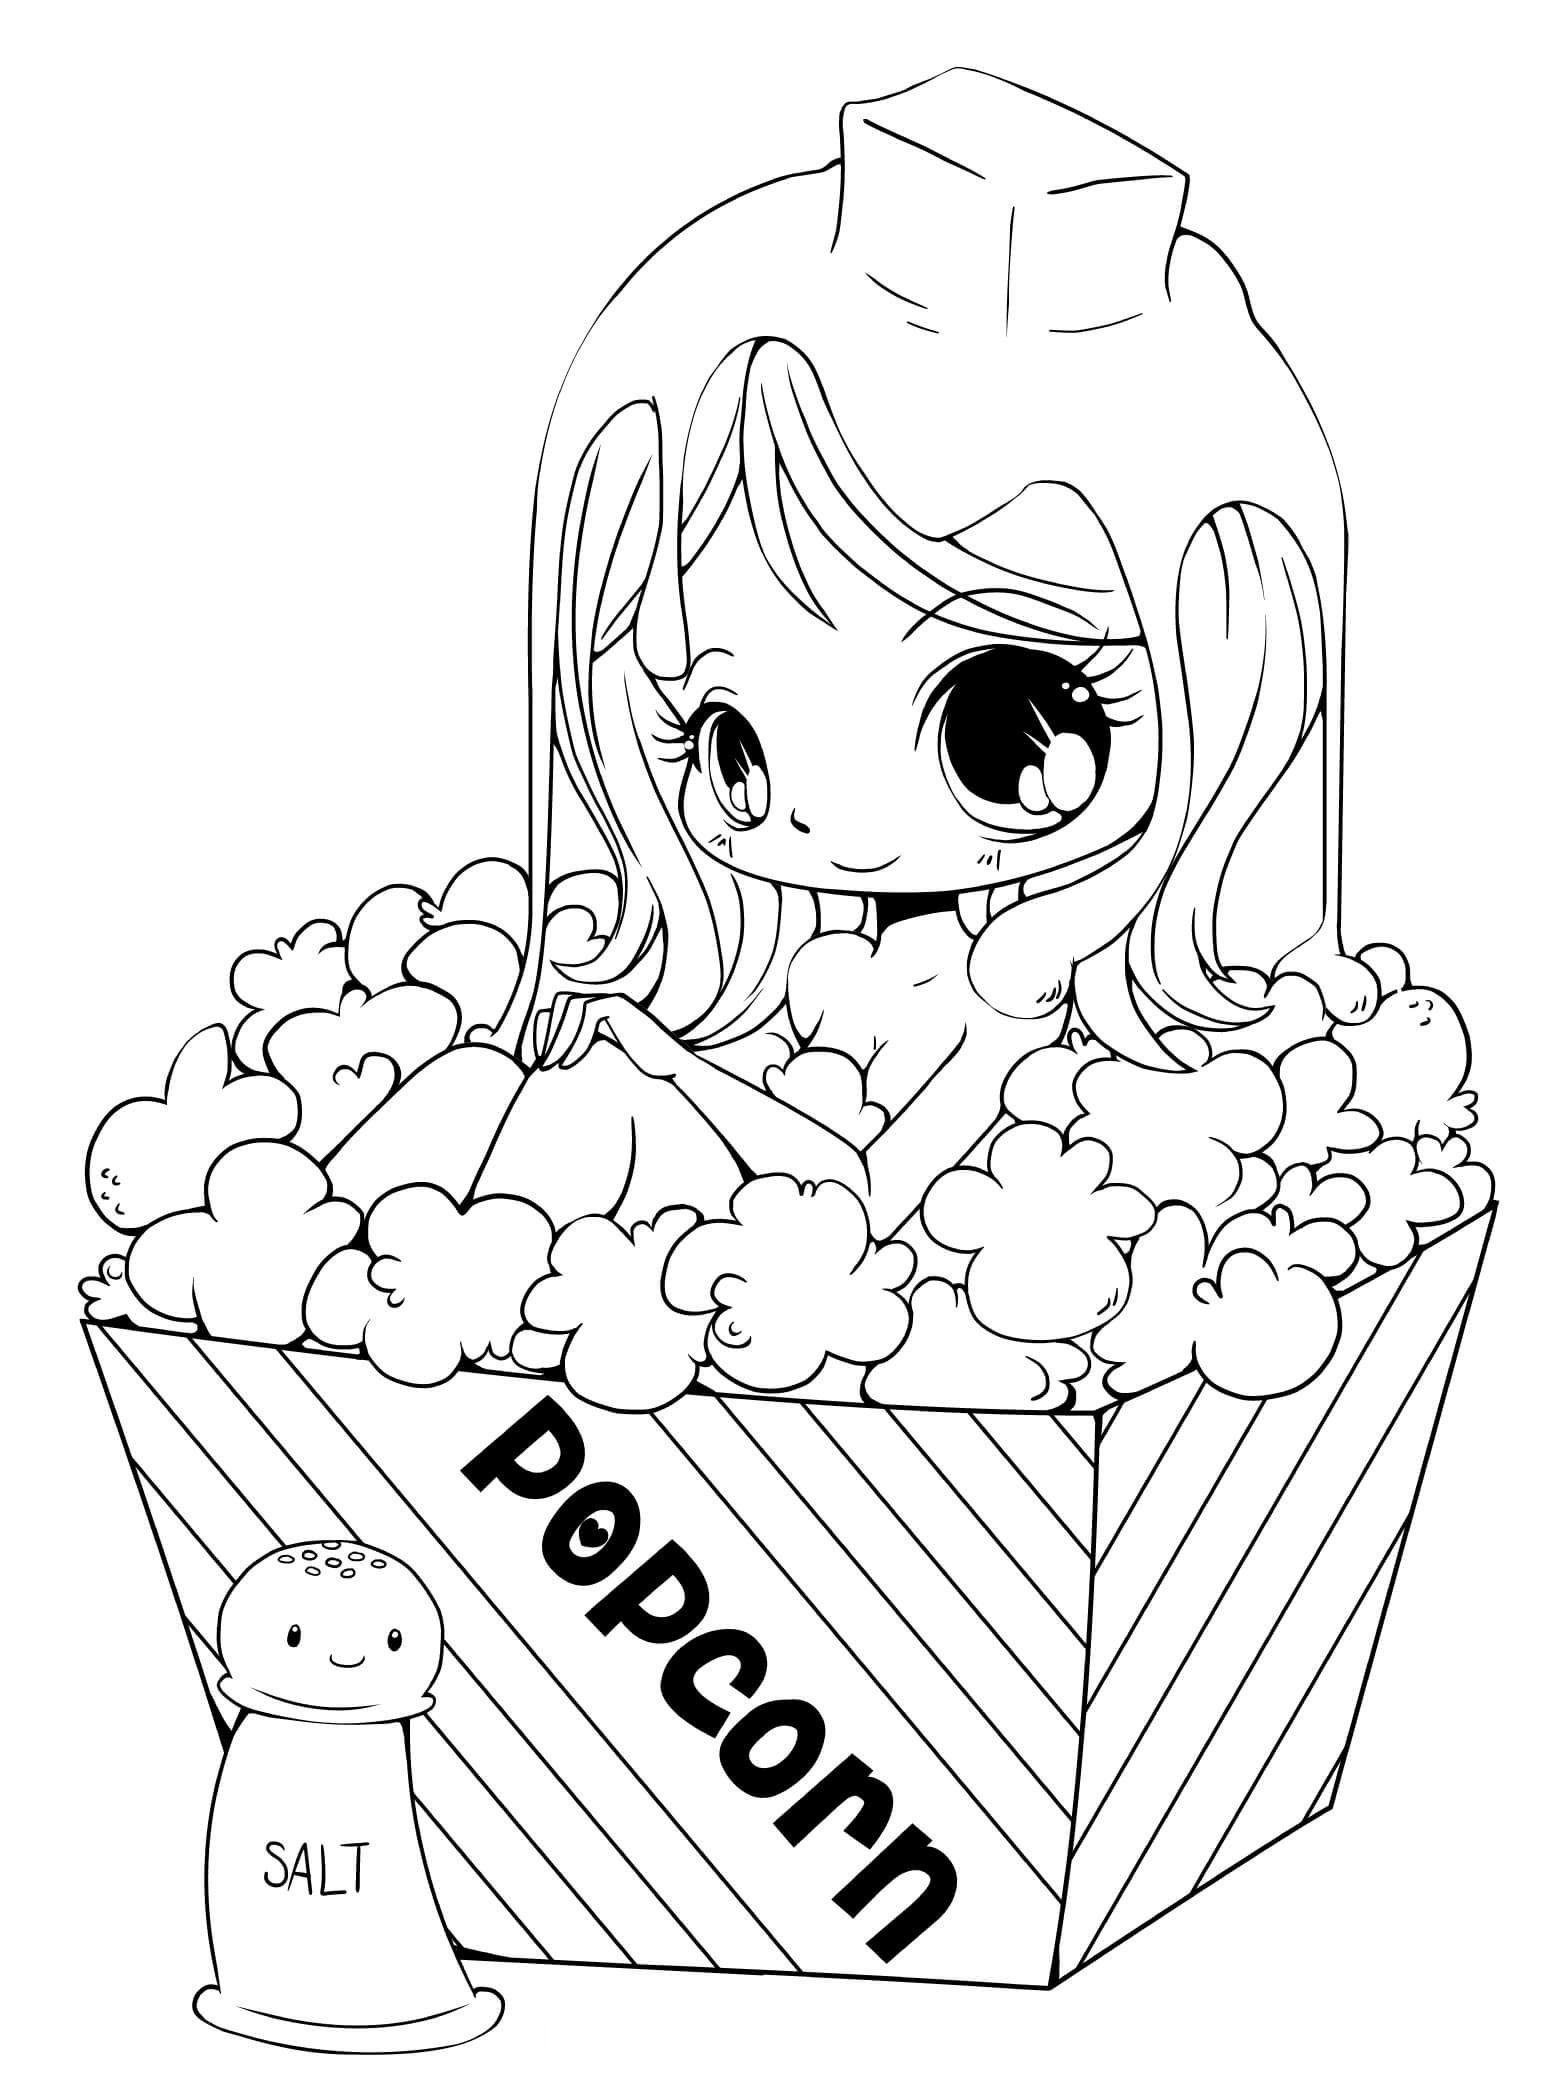 Chibi colouring pages printable for free download